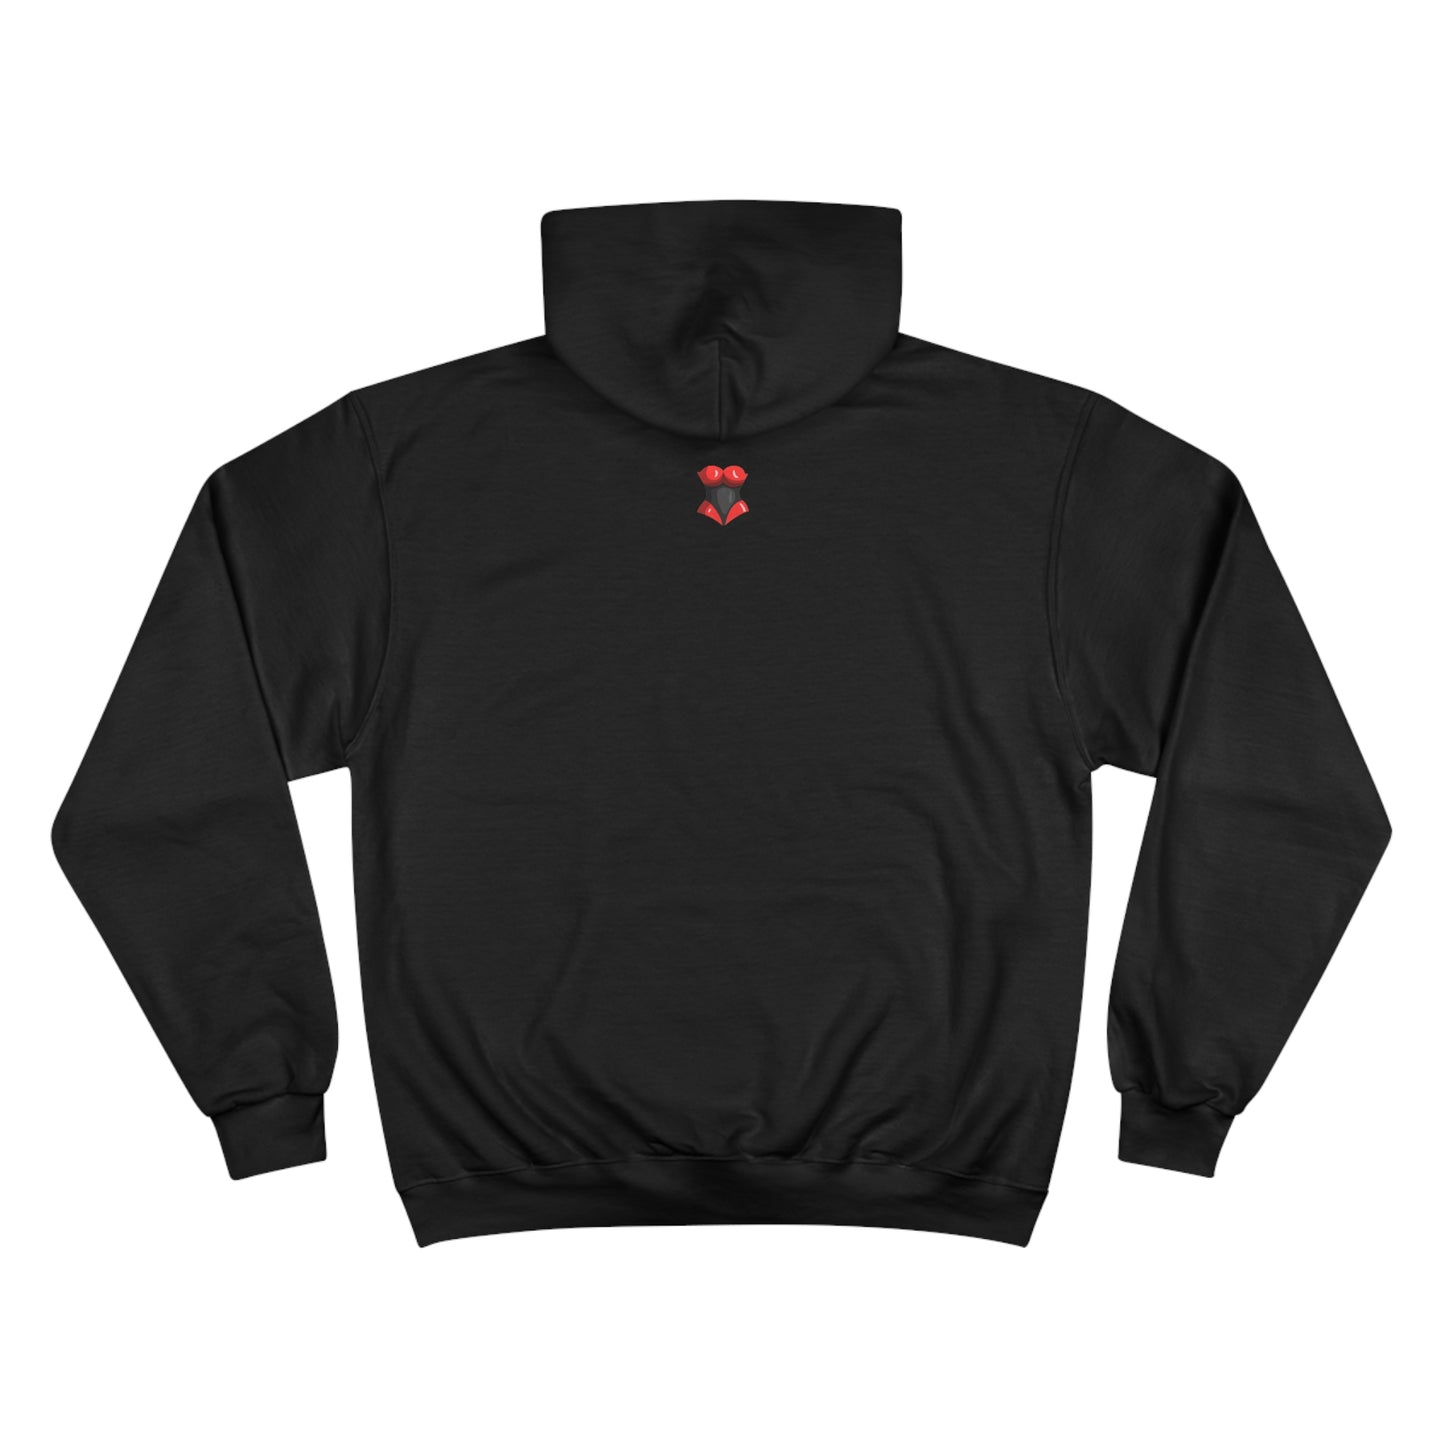 The Yes | Champion Hoodie